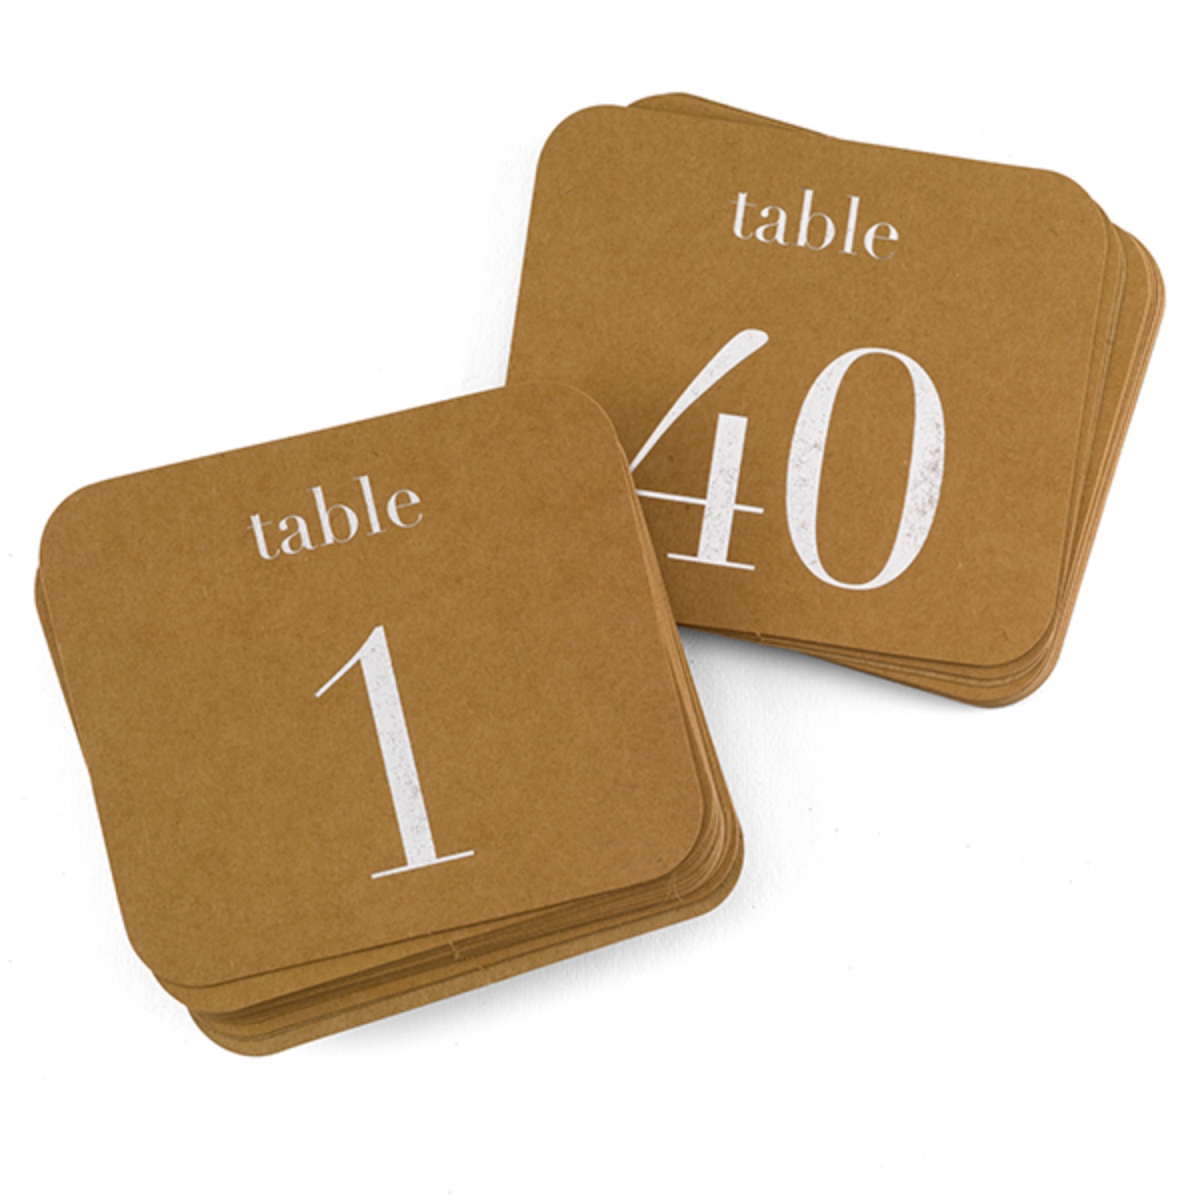 Picture of Hortense B. Hewitt 39512 Kraft Table Number Cards, Silver - 1-40 - Pack of 40